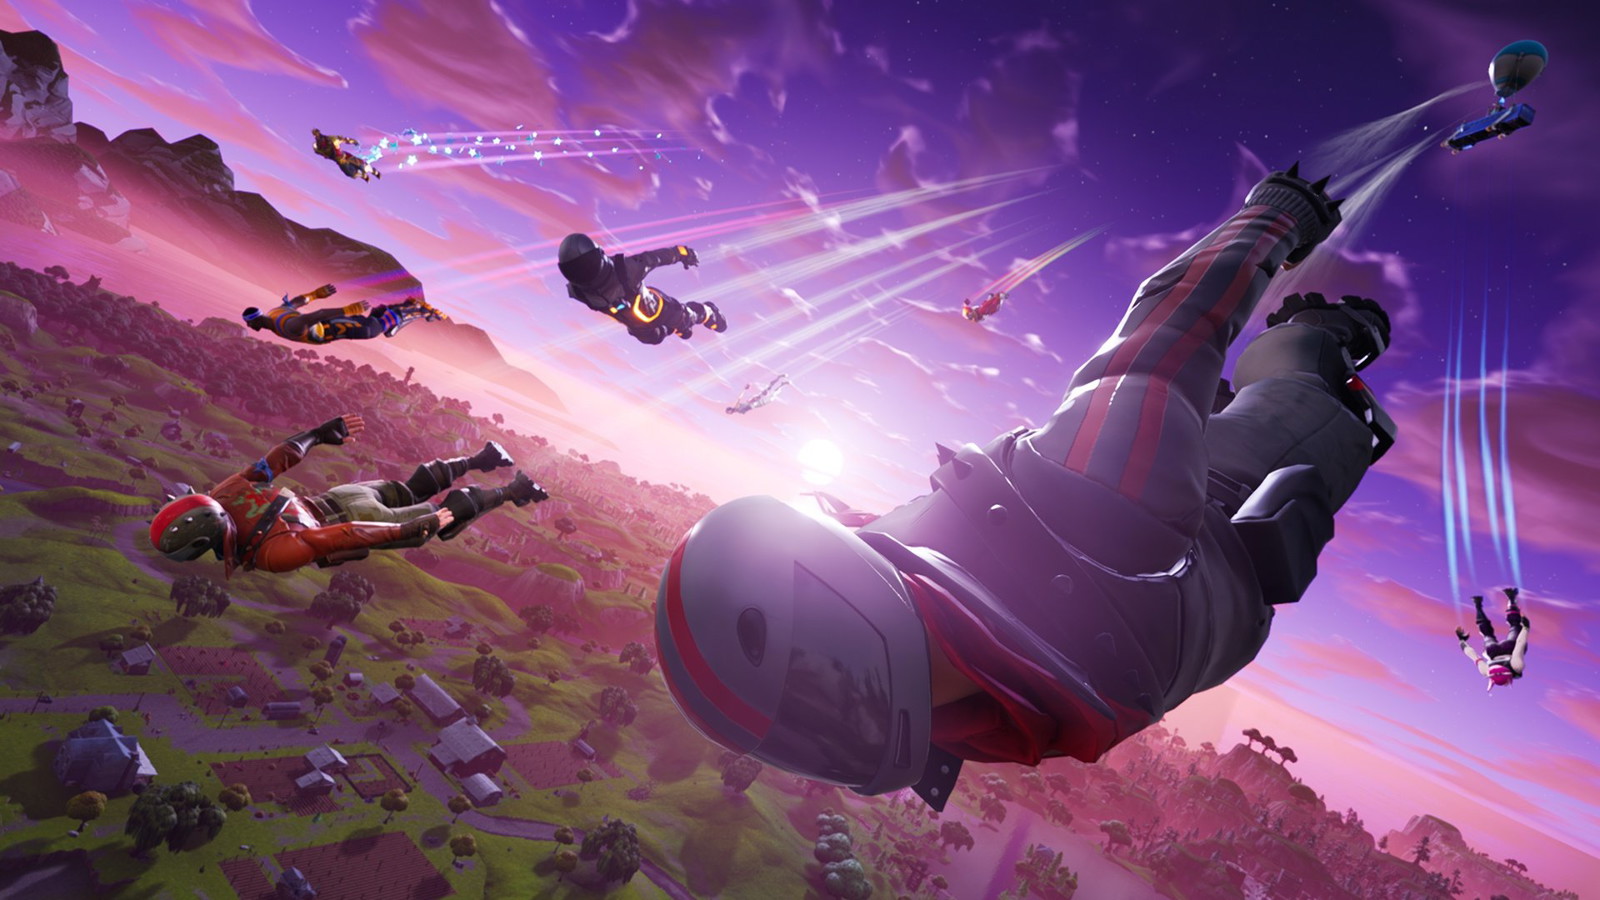 Fortnite V-Bucks price hike sparks debate among players and employees, with some skeptics questioning Epic Games' intentions.

